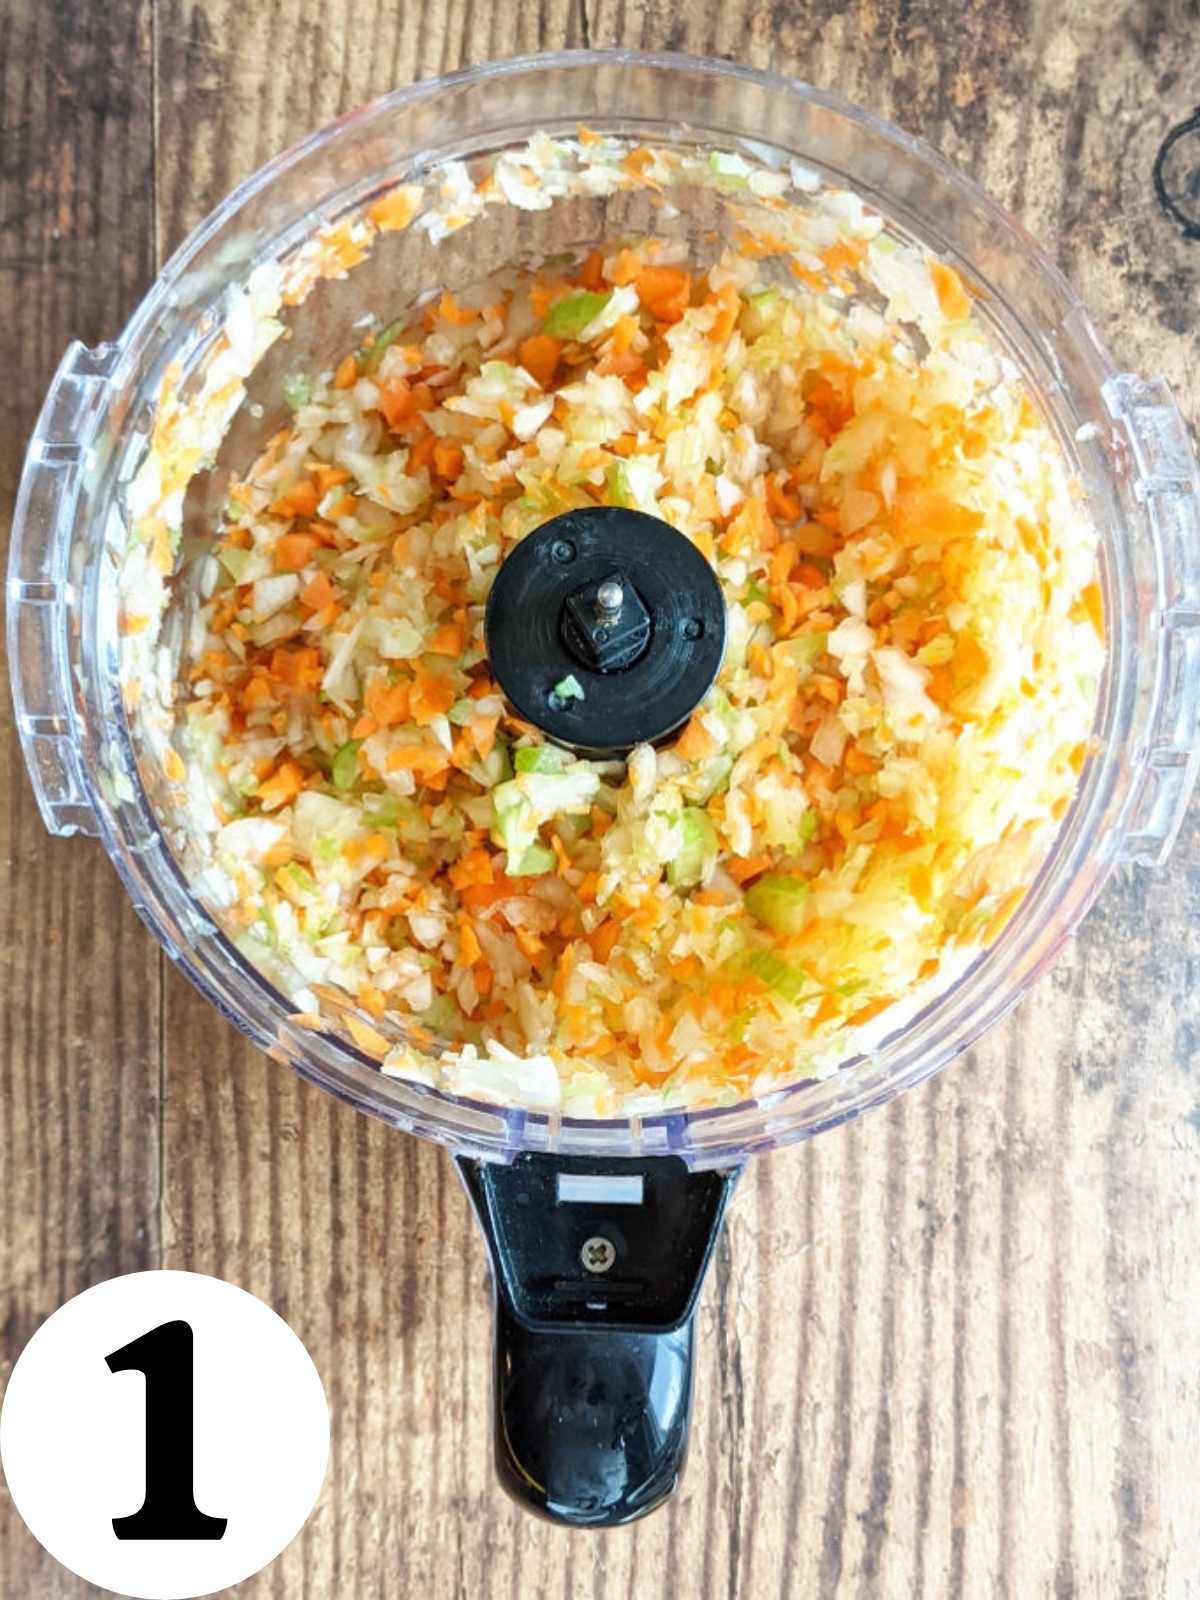 Chopped vegetables in a food processor.